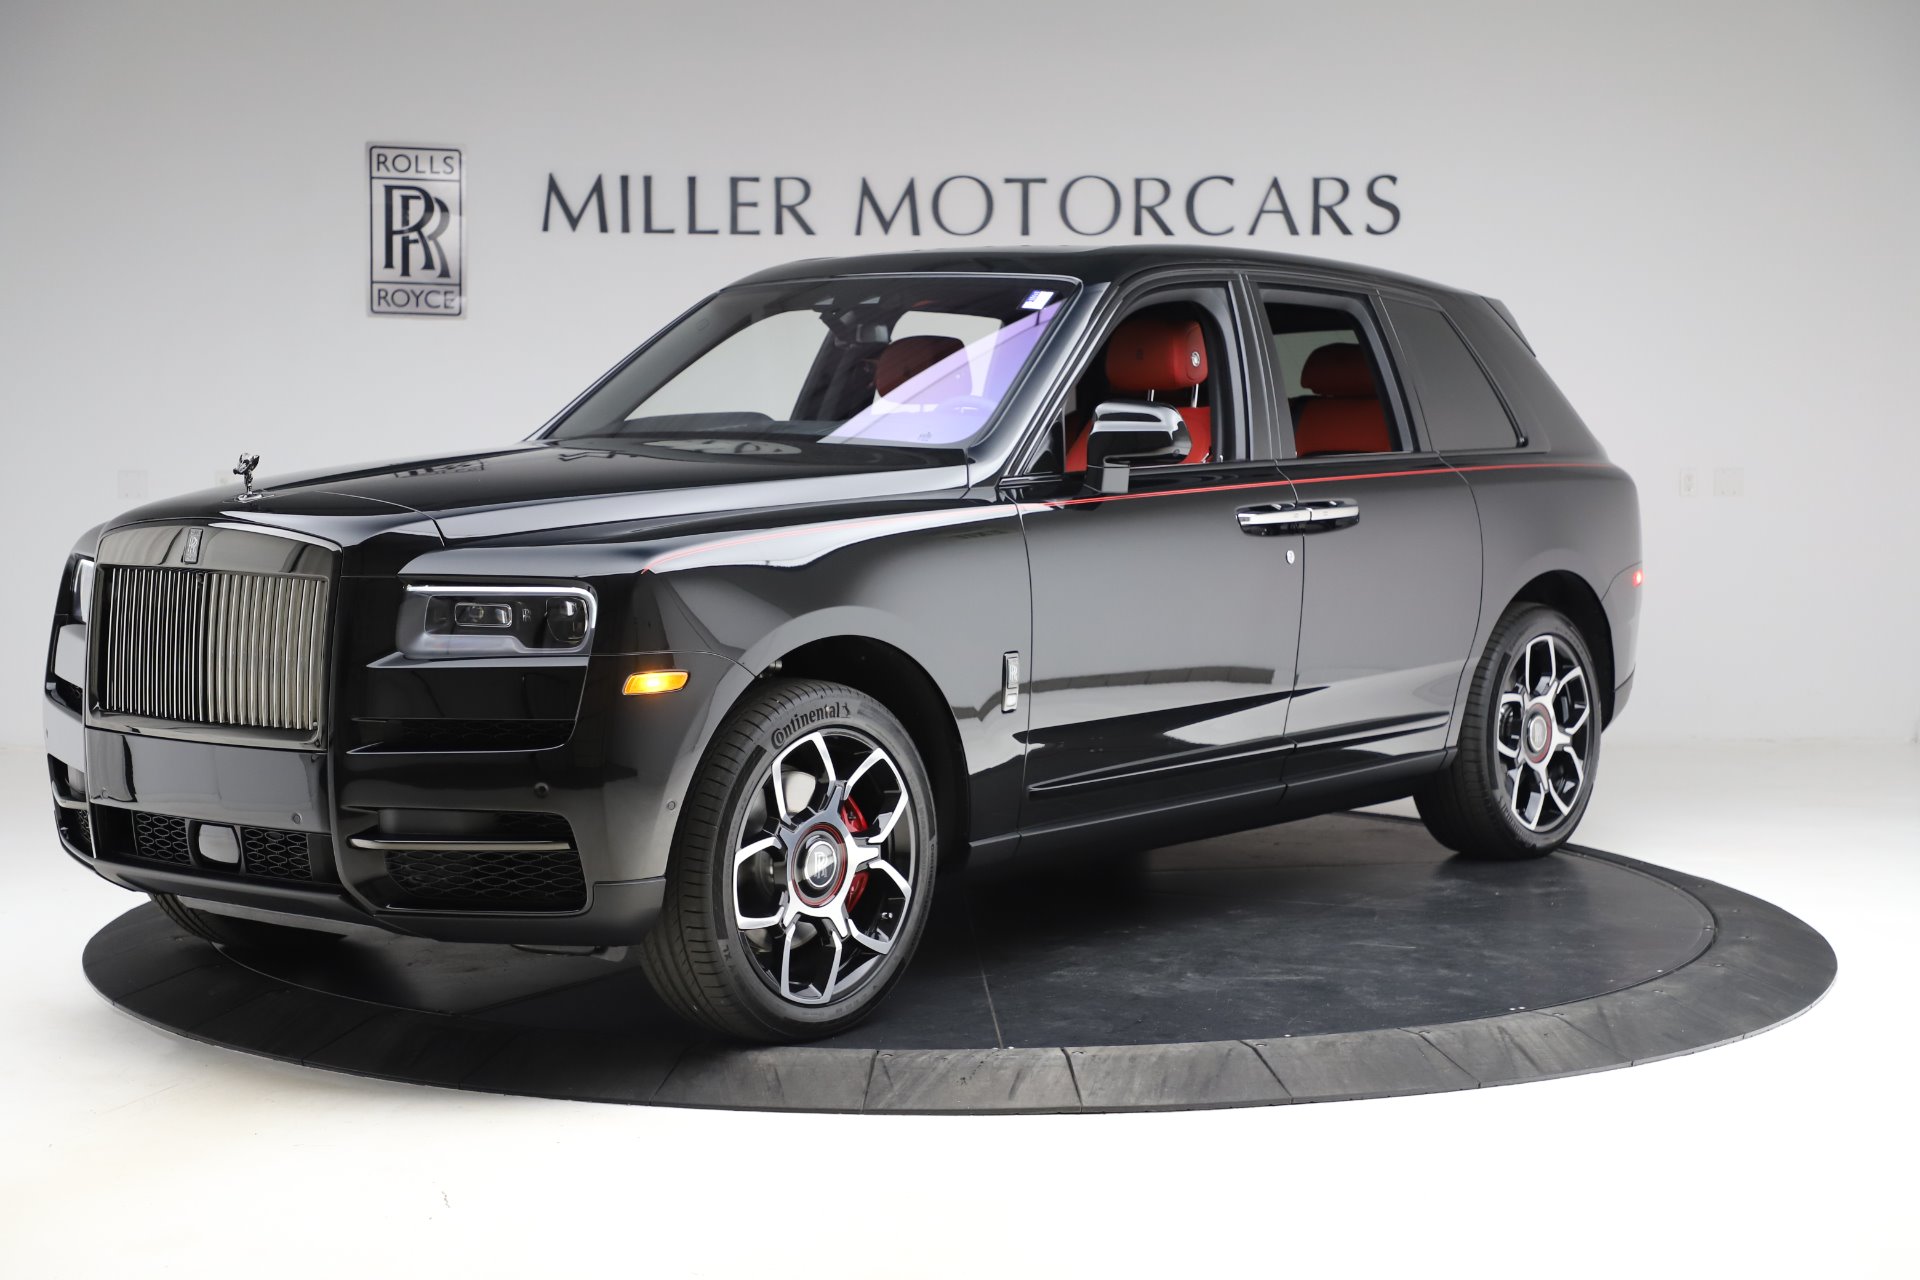 3 Rolls-Royce Cullinan Black Badge Owners & Their Exquisite Cars